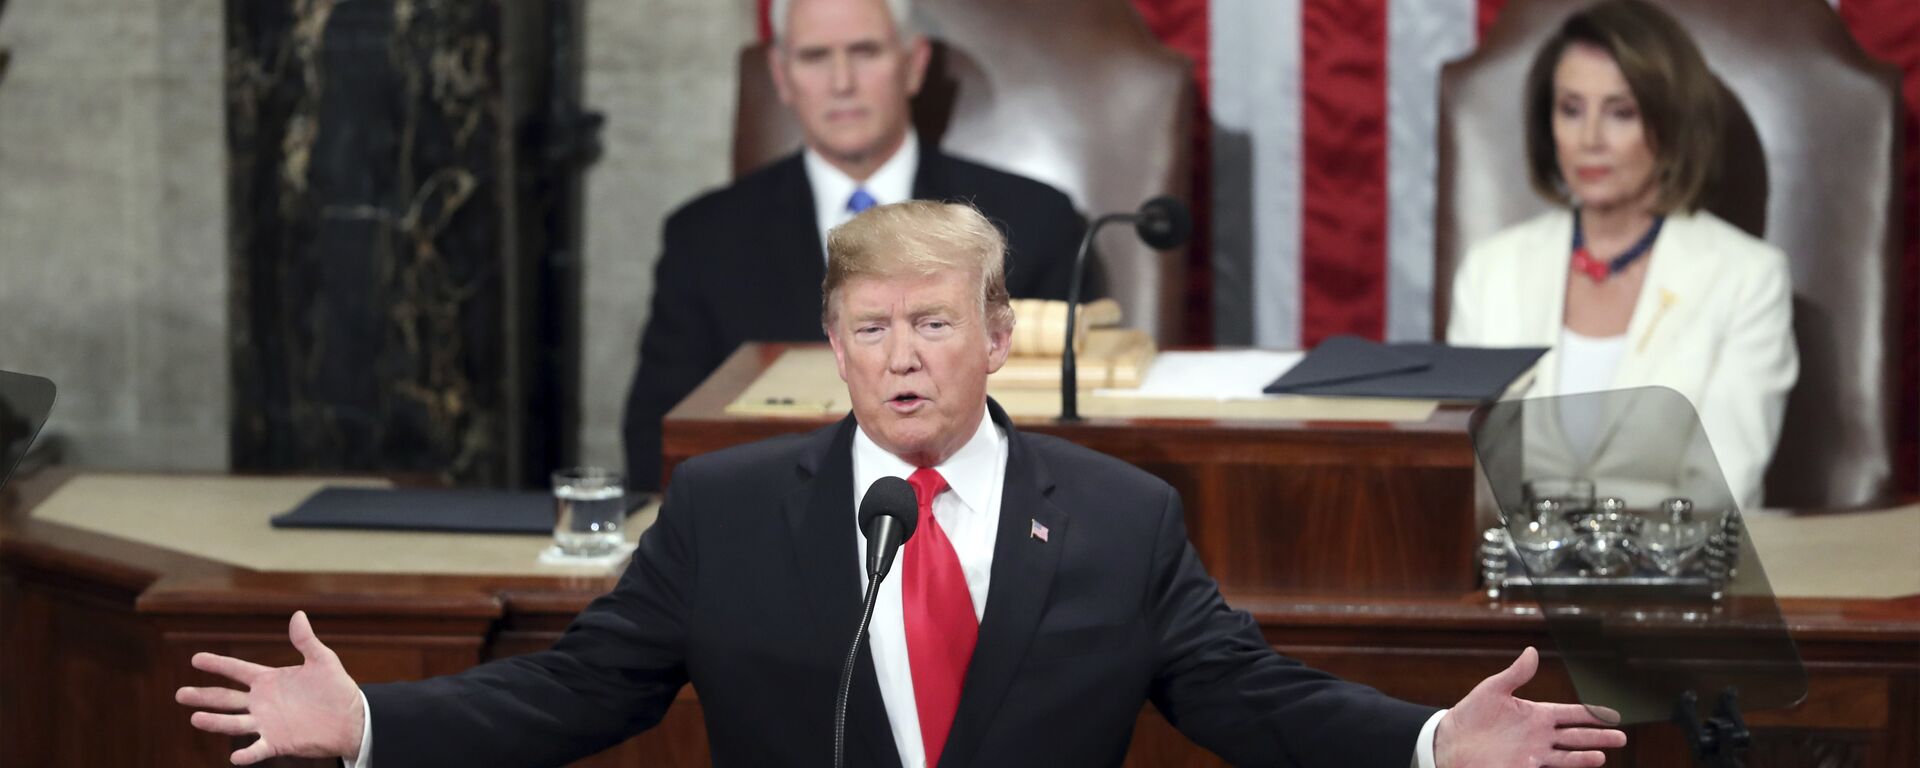 President Donald Trump delivers his State of the Union address to a joint session of Congress on Capitol Hill in Washington - Sputnik International, 1920, 18.12.2019